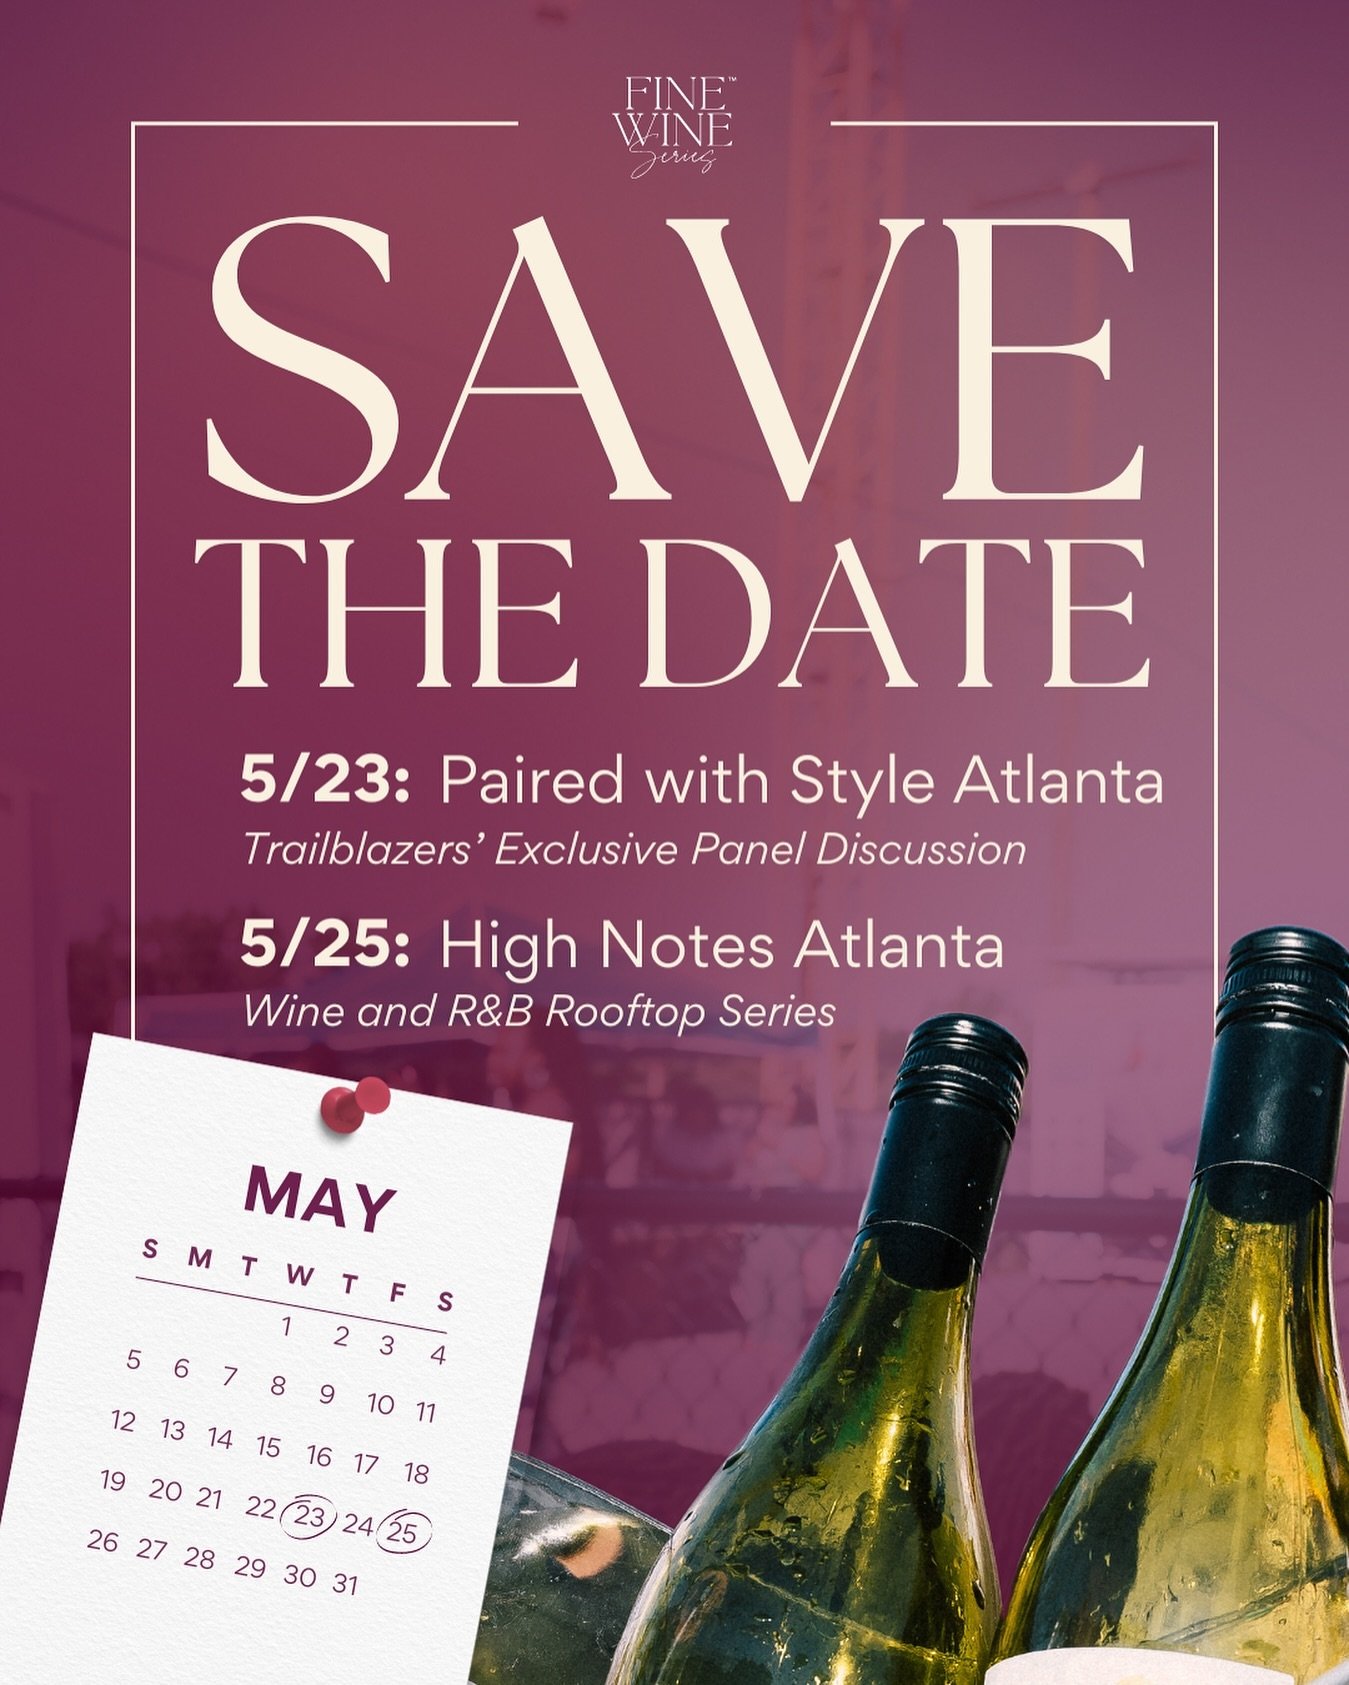 MAY FWS EVENTS LINEUP 🗓️

Here&rsquo;s what we&rsquo;re cooking up&hellip;

Join us May 23rd in Atlanta for our exclusive panel discussion featuring trailblazers in Wine, Food, Fashion and Culture.

And May 25th for our official Atlanta debut of Hig